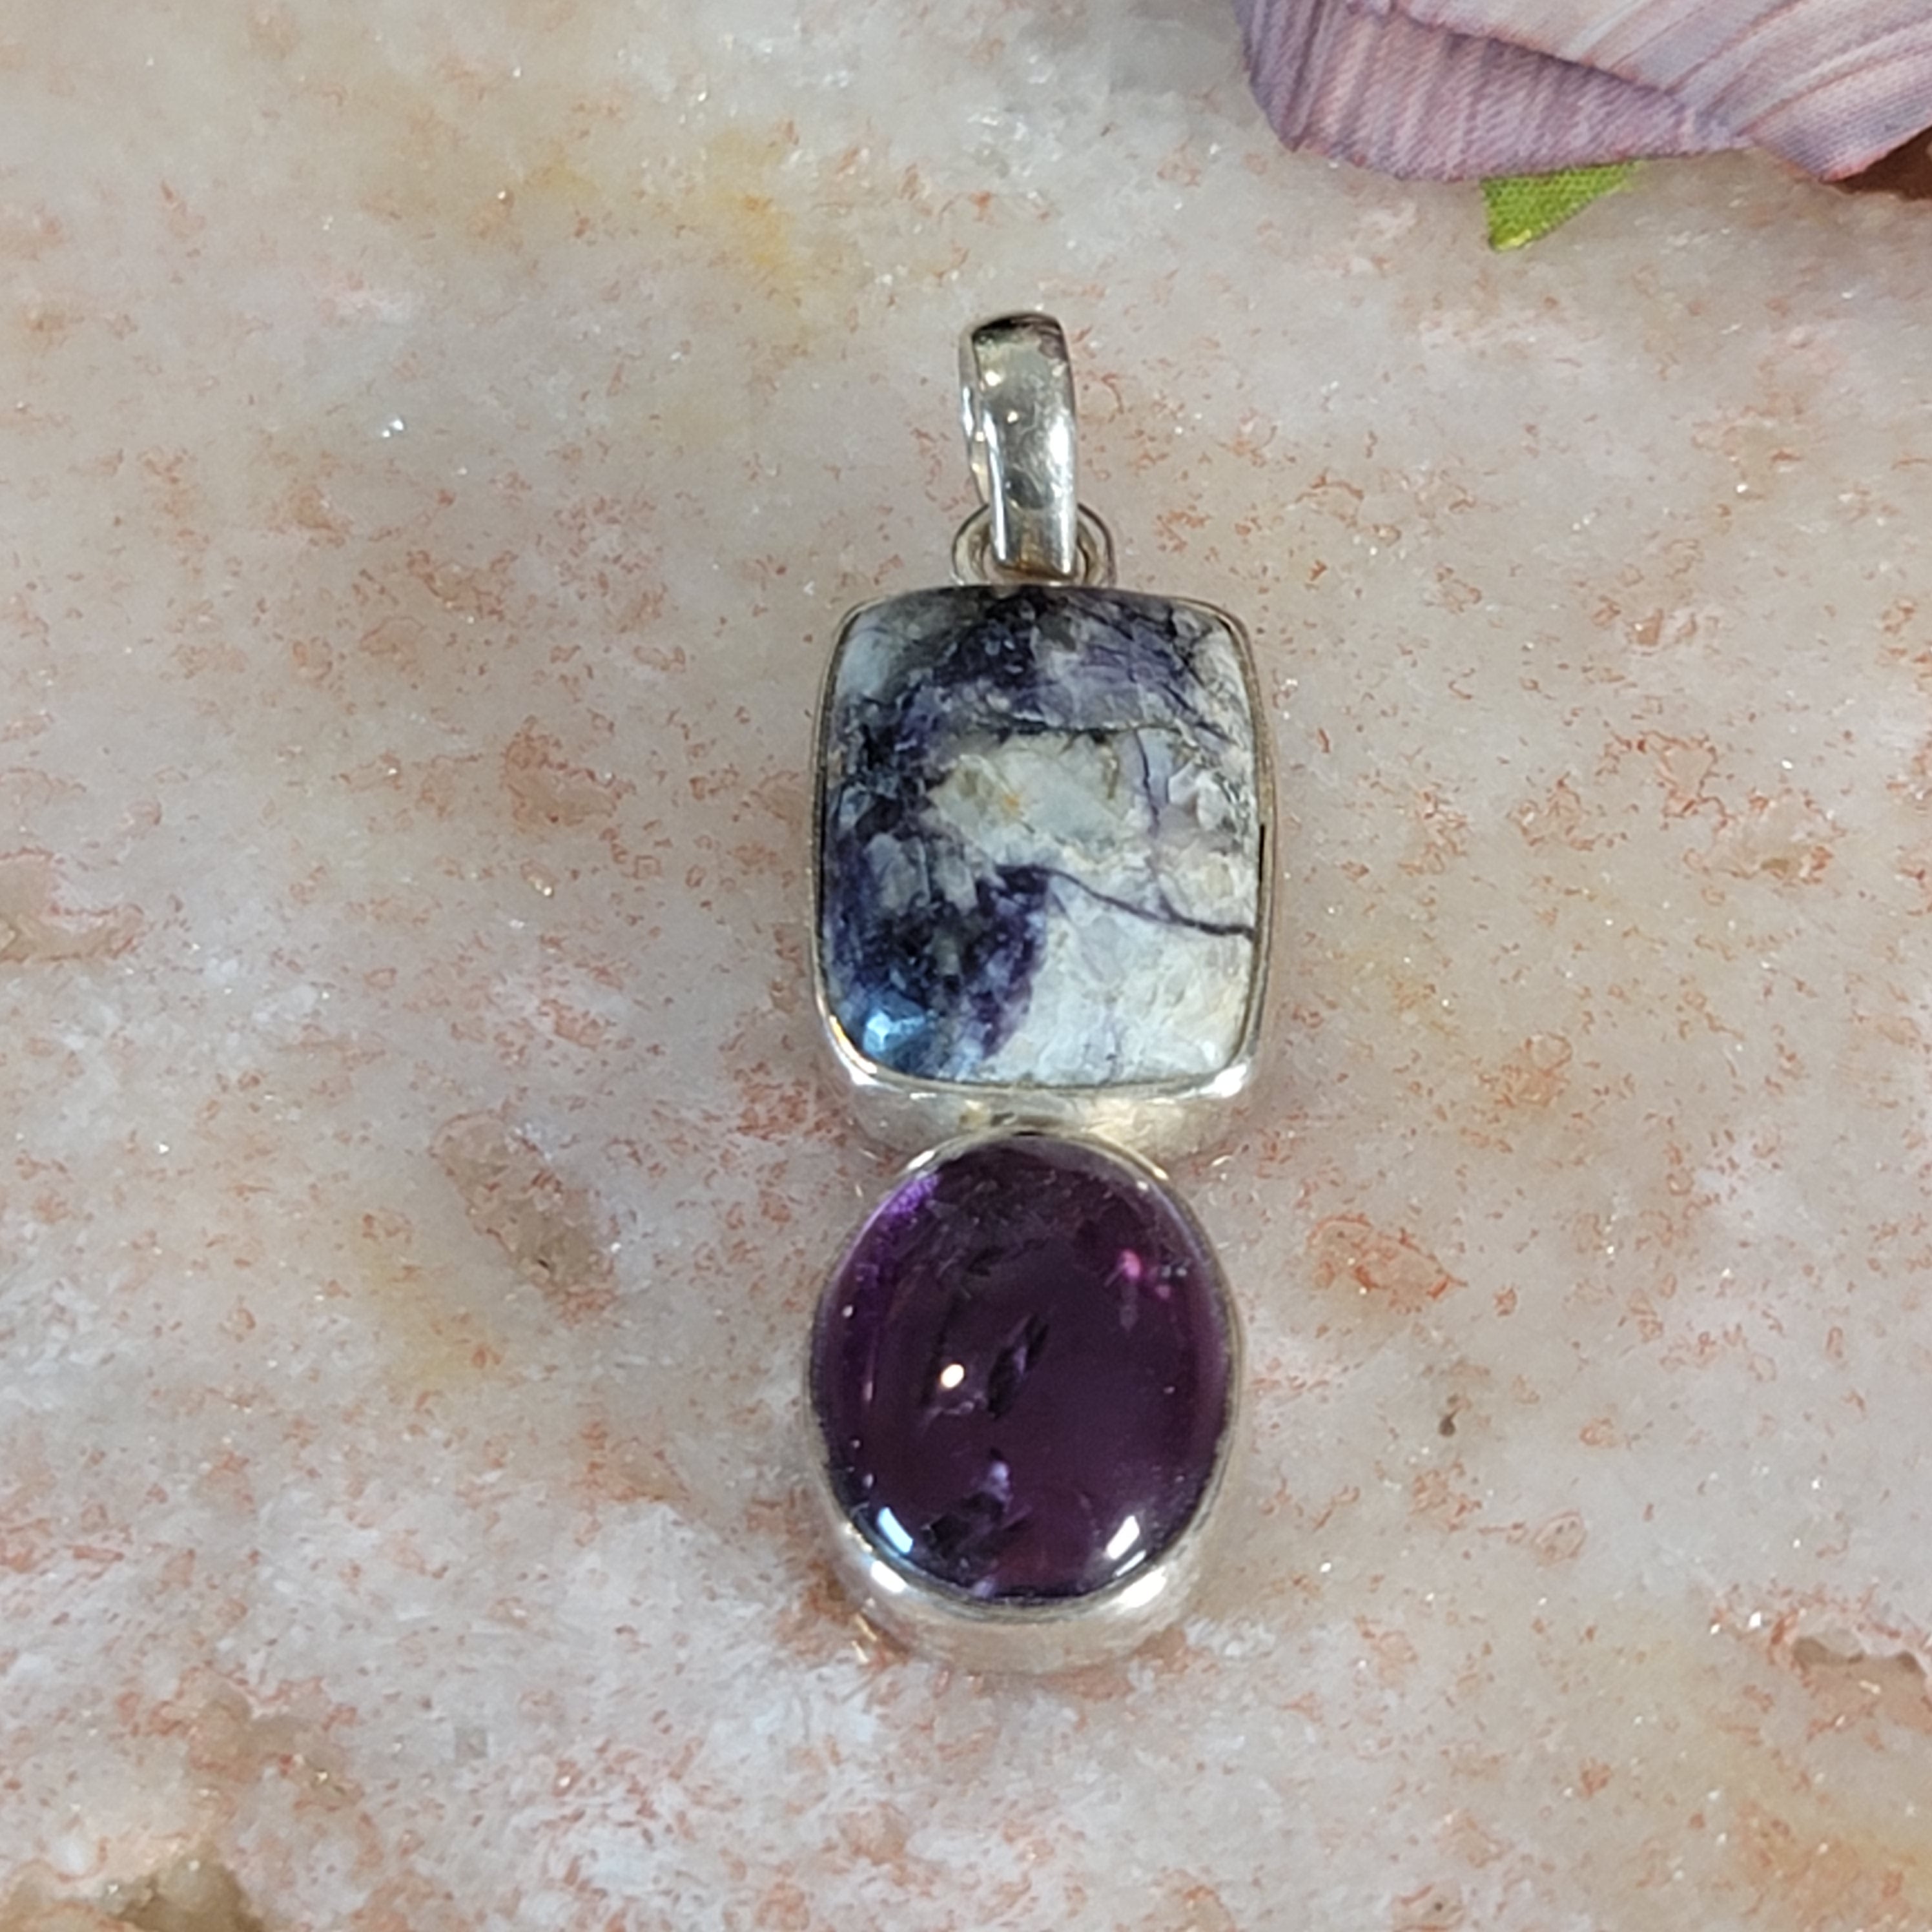 Purple Opal Pendant .925 Silver Pendant for Spiritual Insight and Realization of your Path